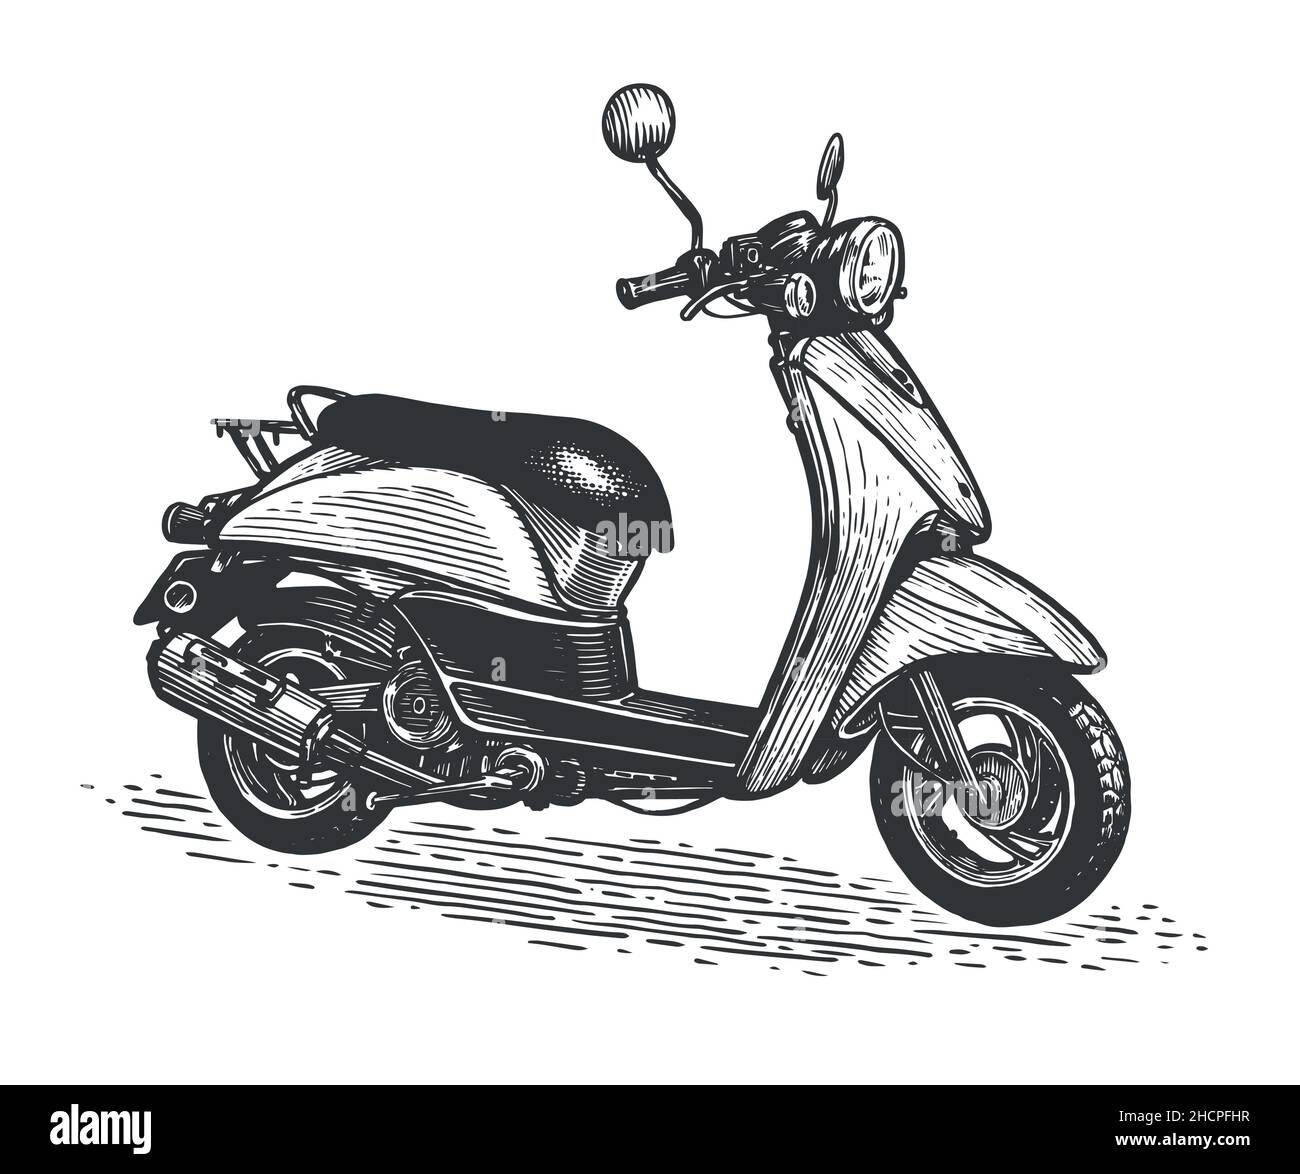 Scooter sketch. Moped for delivery, scooter for tourism Stock Vector